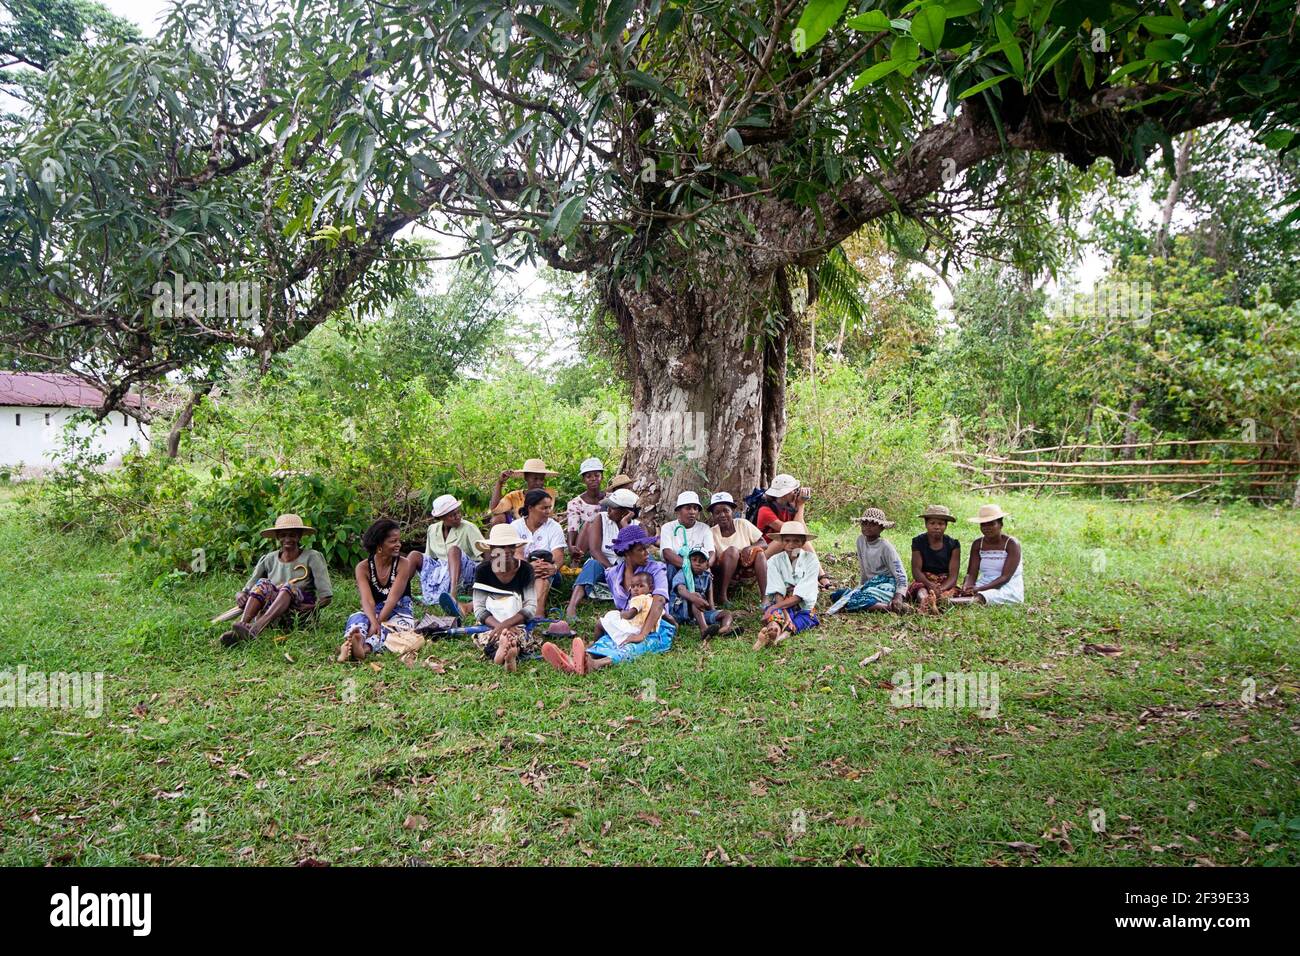 Famadihana ceremony, or Turning of the Bones, a Malagasy tradition of celebrating their dead ancestors, people sitting under a tree, Madagascar Stock Photo